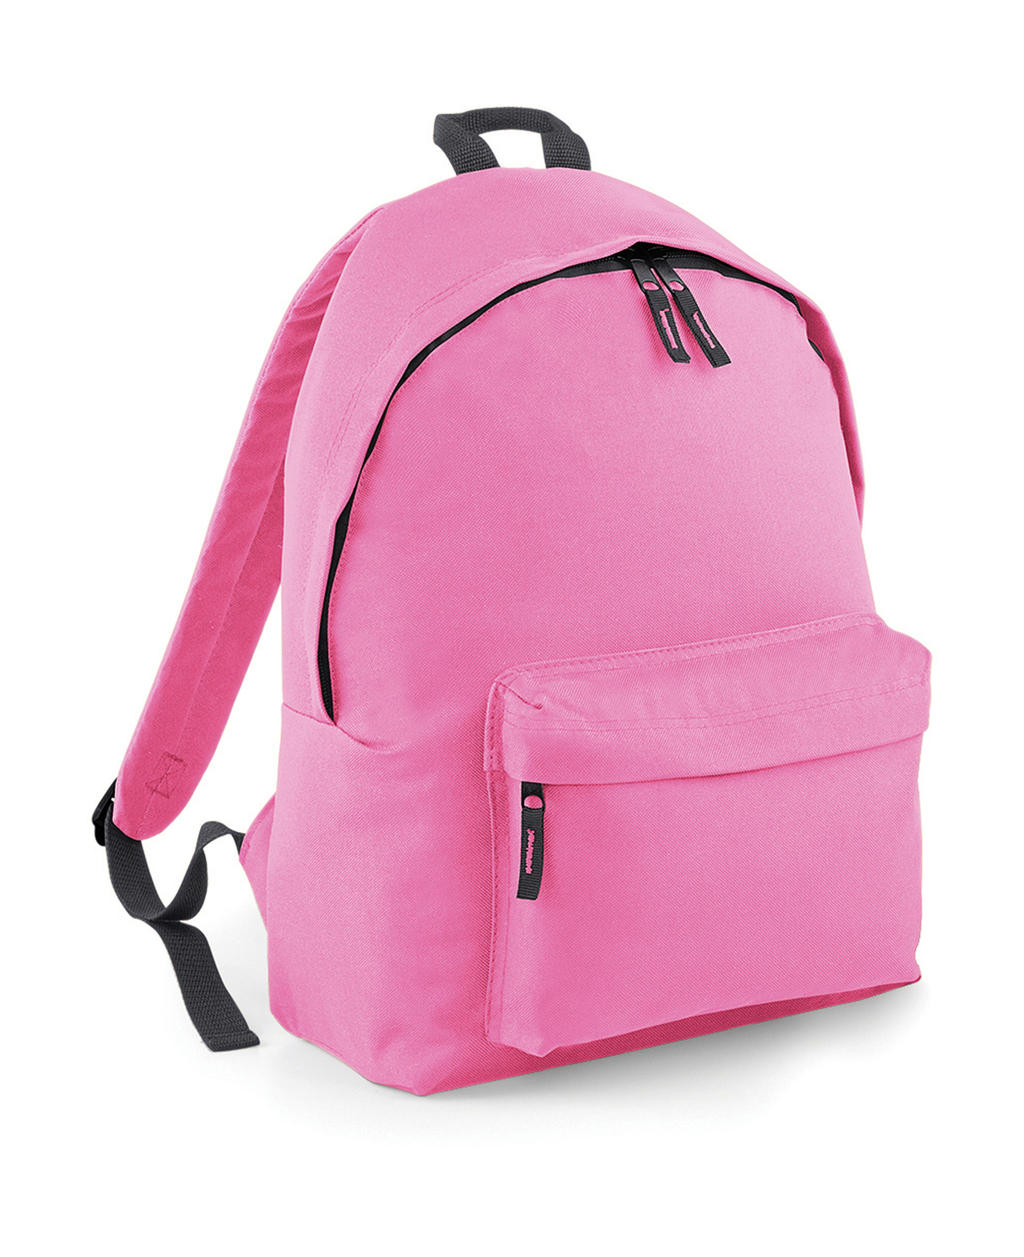  Original Fashion Backpack in Farbe Classic Pink/Graphite Grey